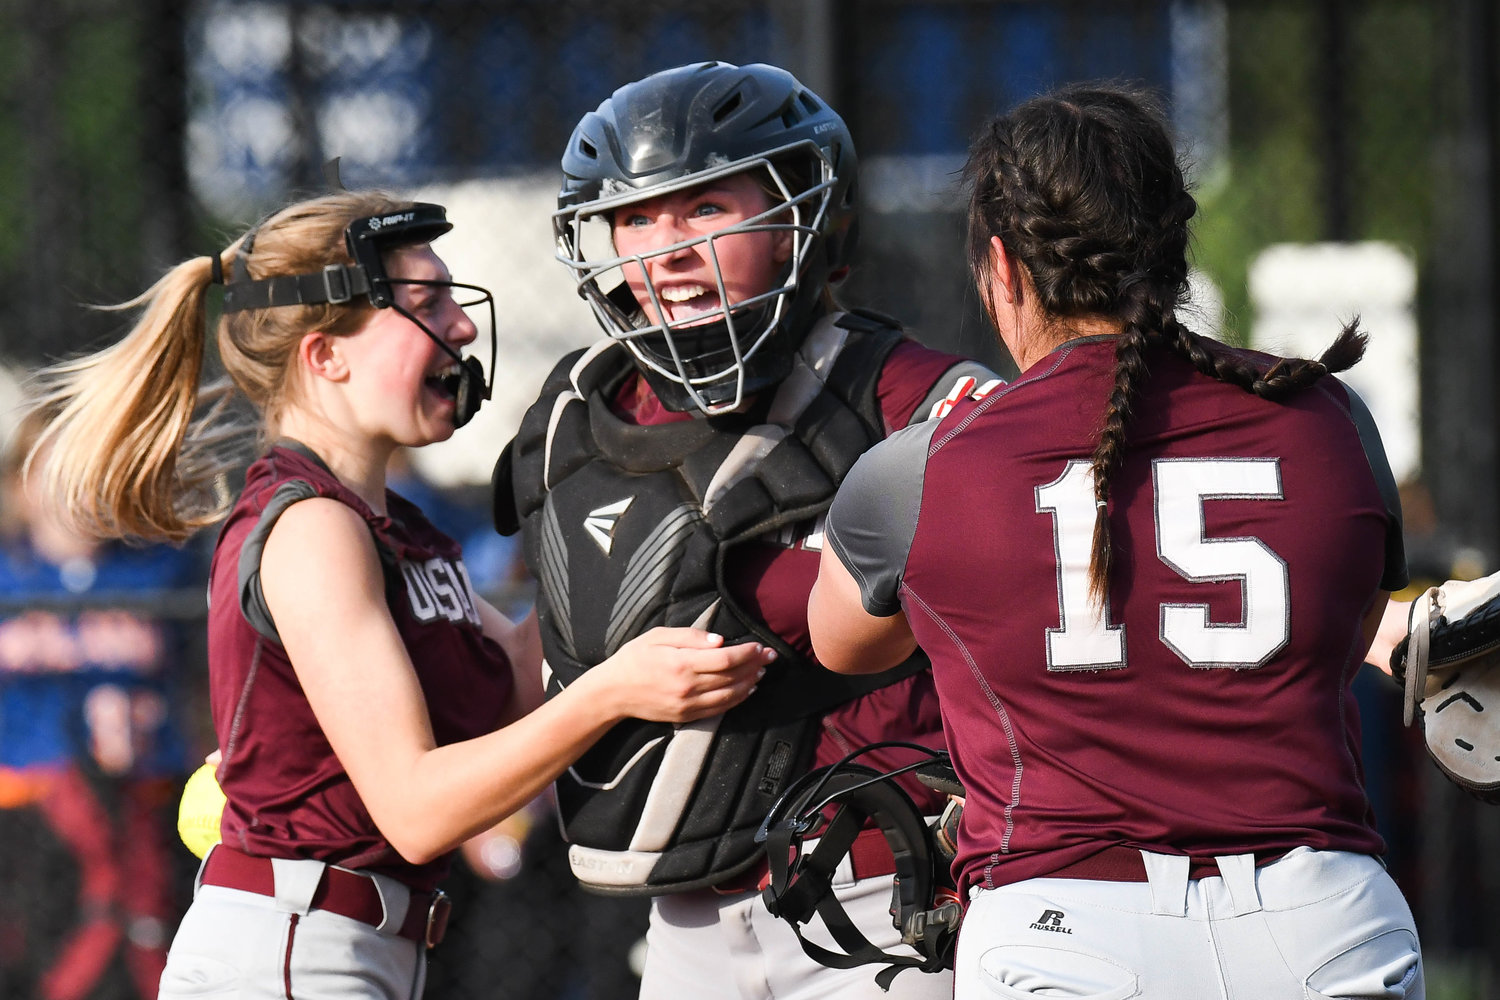 Oriskany catcher Kaelyn Buehler yells in excitement with teammates after winning the Section III Class D final 5-4 against Poland on Tuesday at Carrier Park in Syracuse.